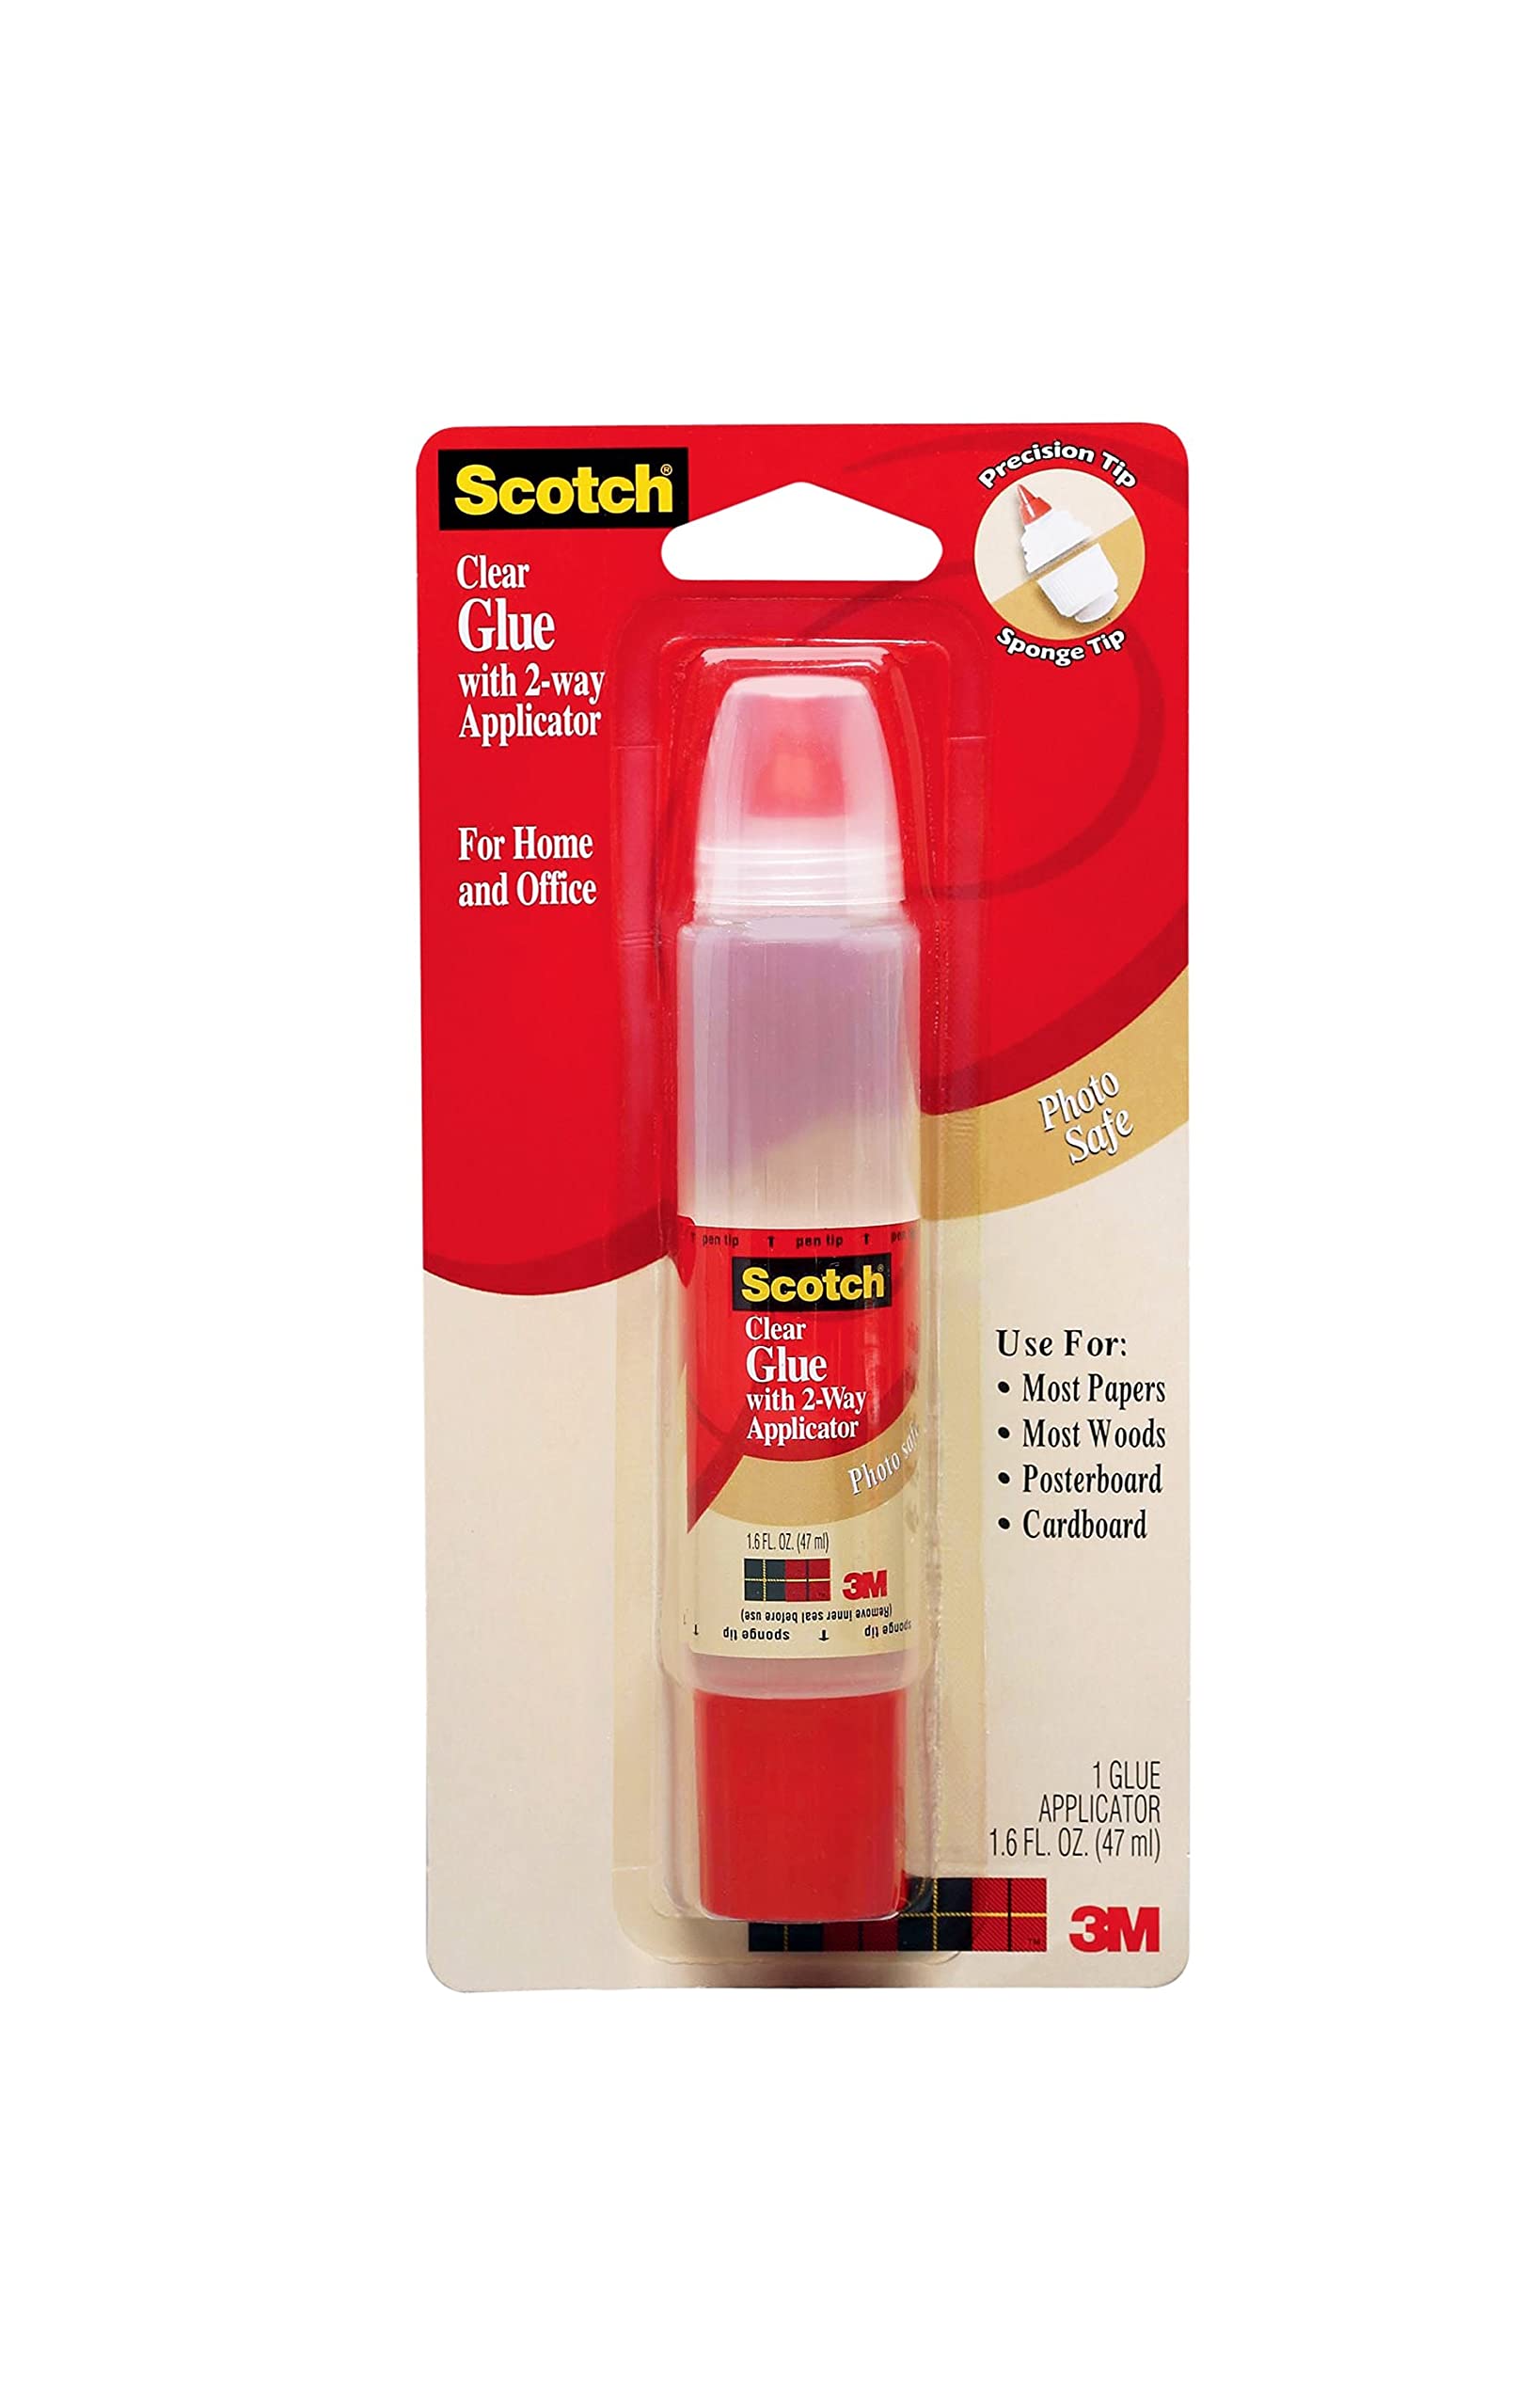 Scotch Clear Glue in 2-Way Applicator 1.6 oz Photo Safe and Non-Toxic (6050)